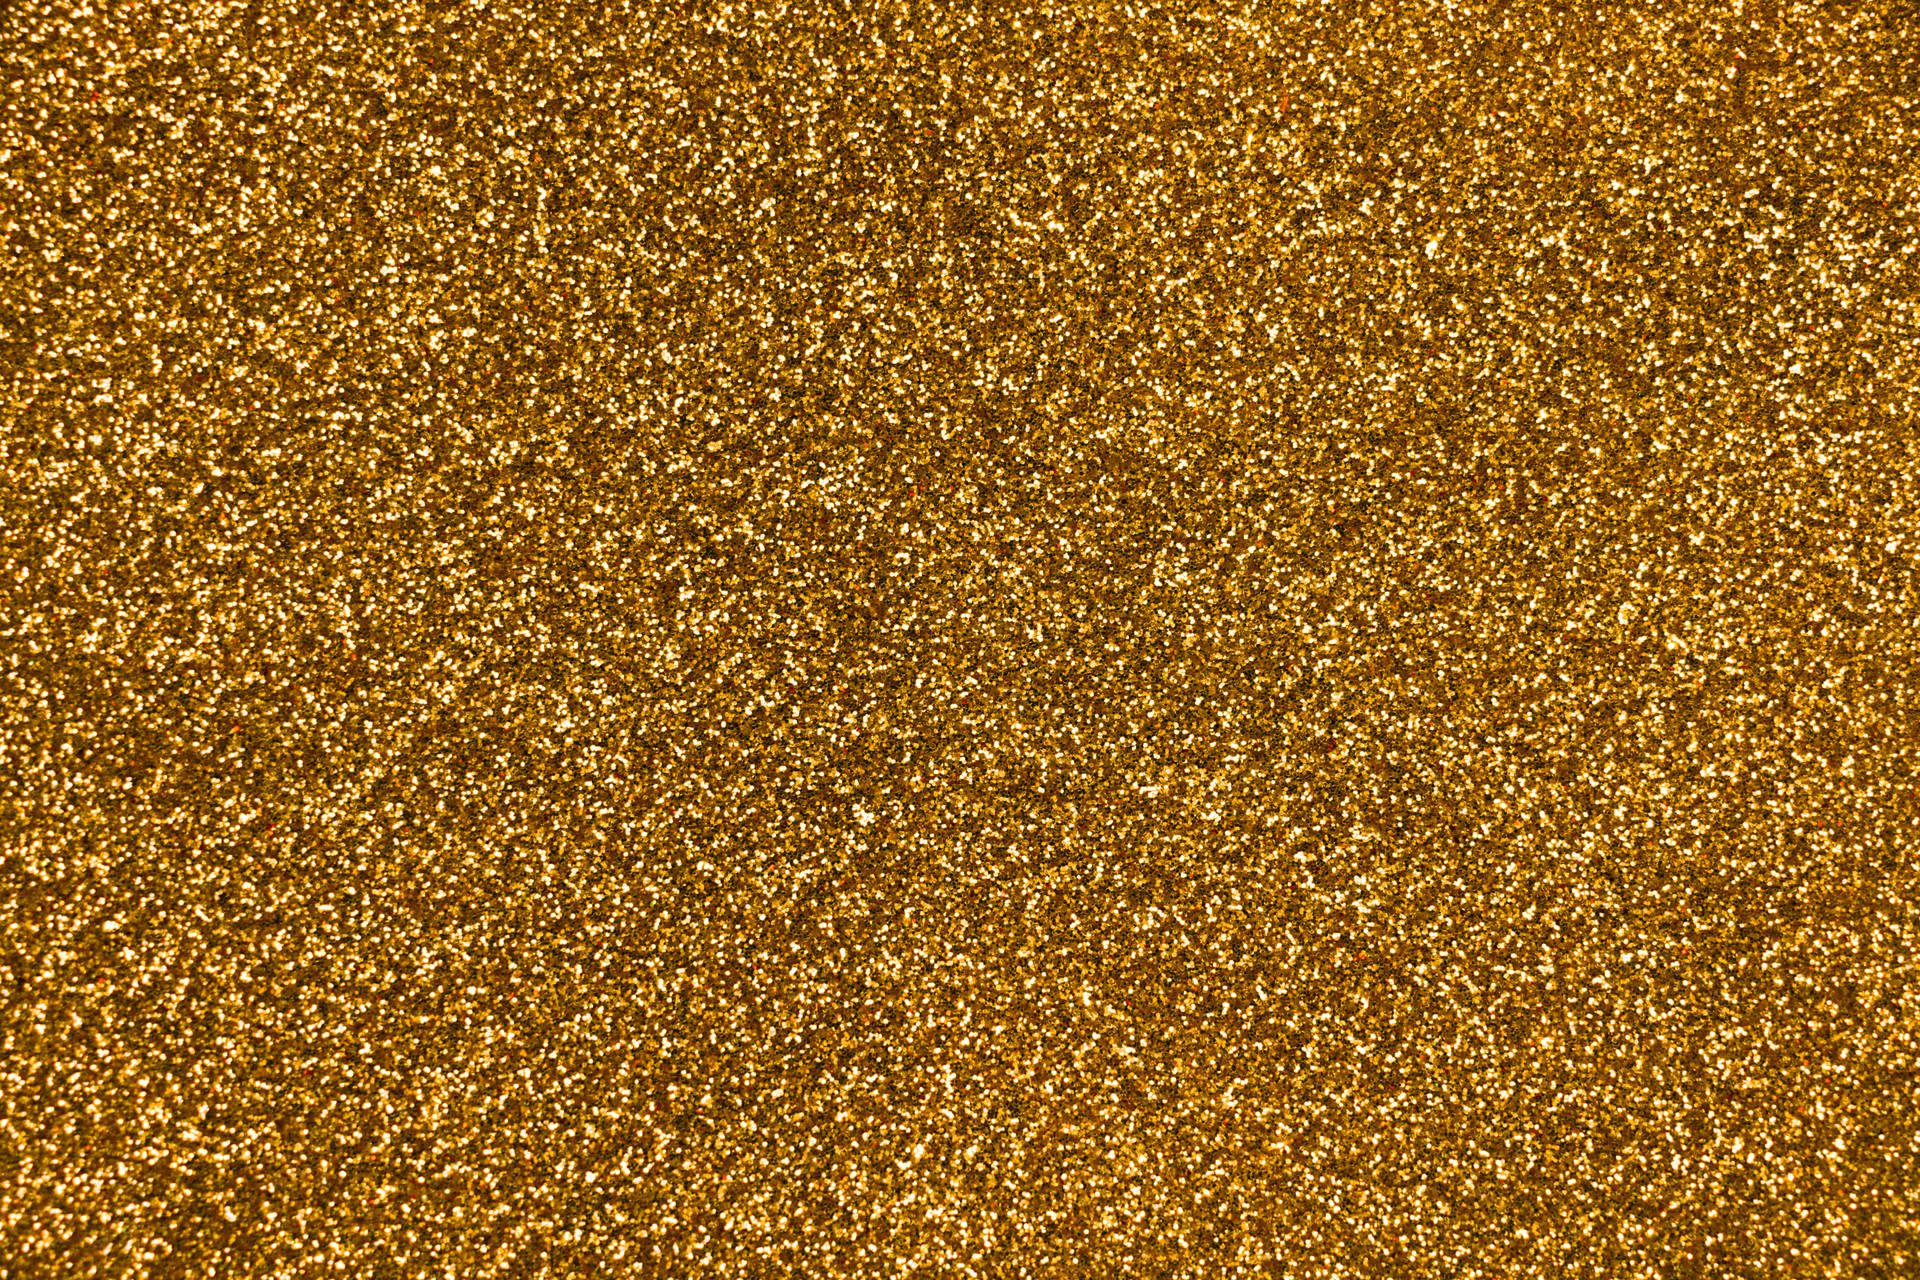 5472X3648 Glitter Wallpaper and Background